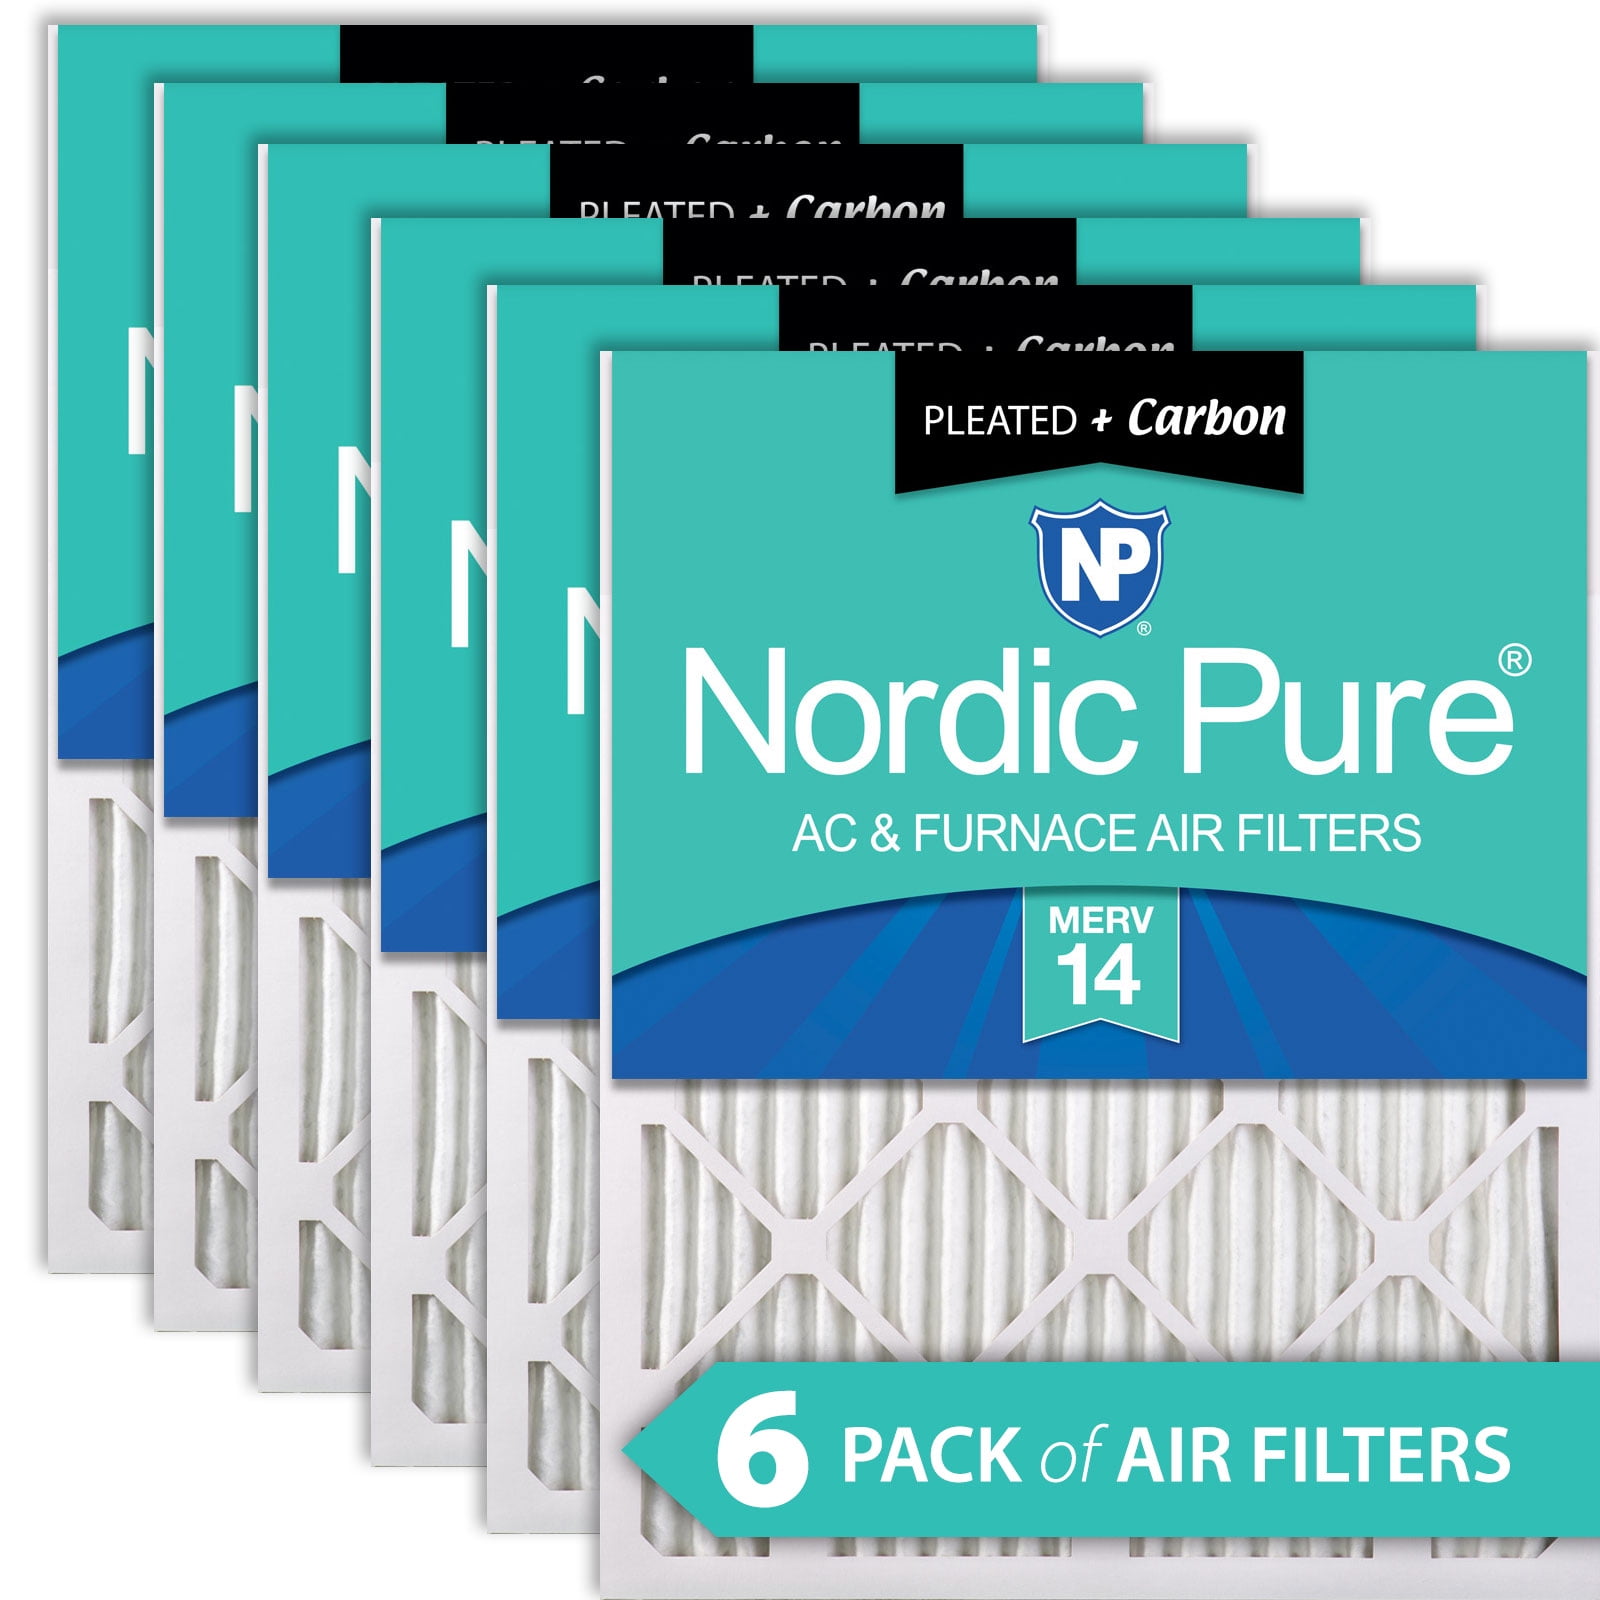 3 Air Filters MERV 14 24x24x4 trapping pollutants particulates Bacteria Allergen 